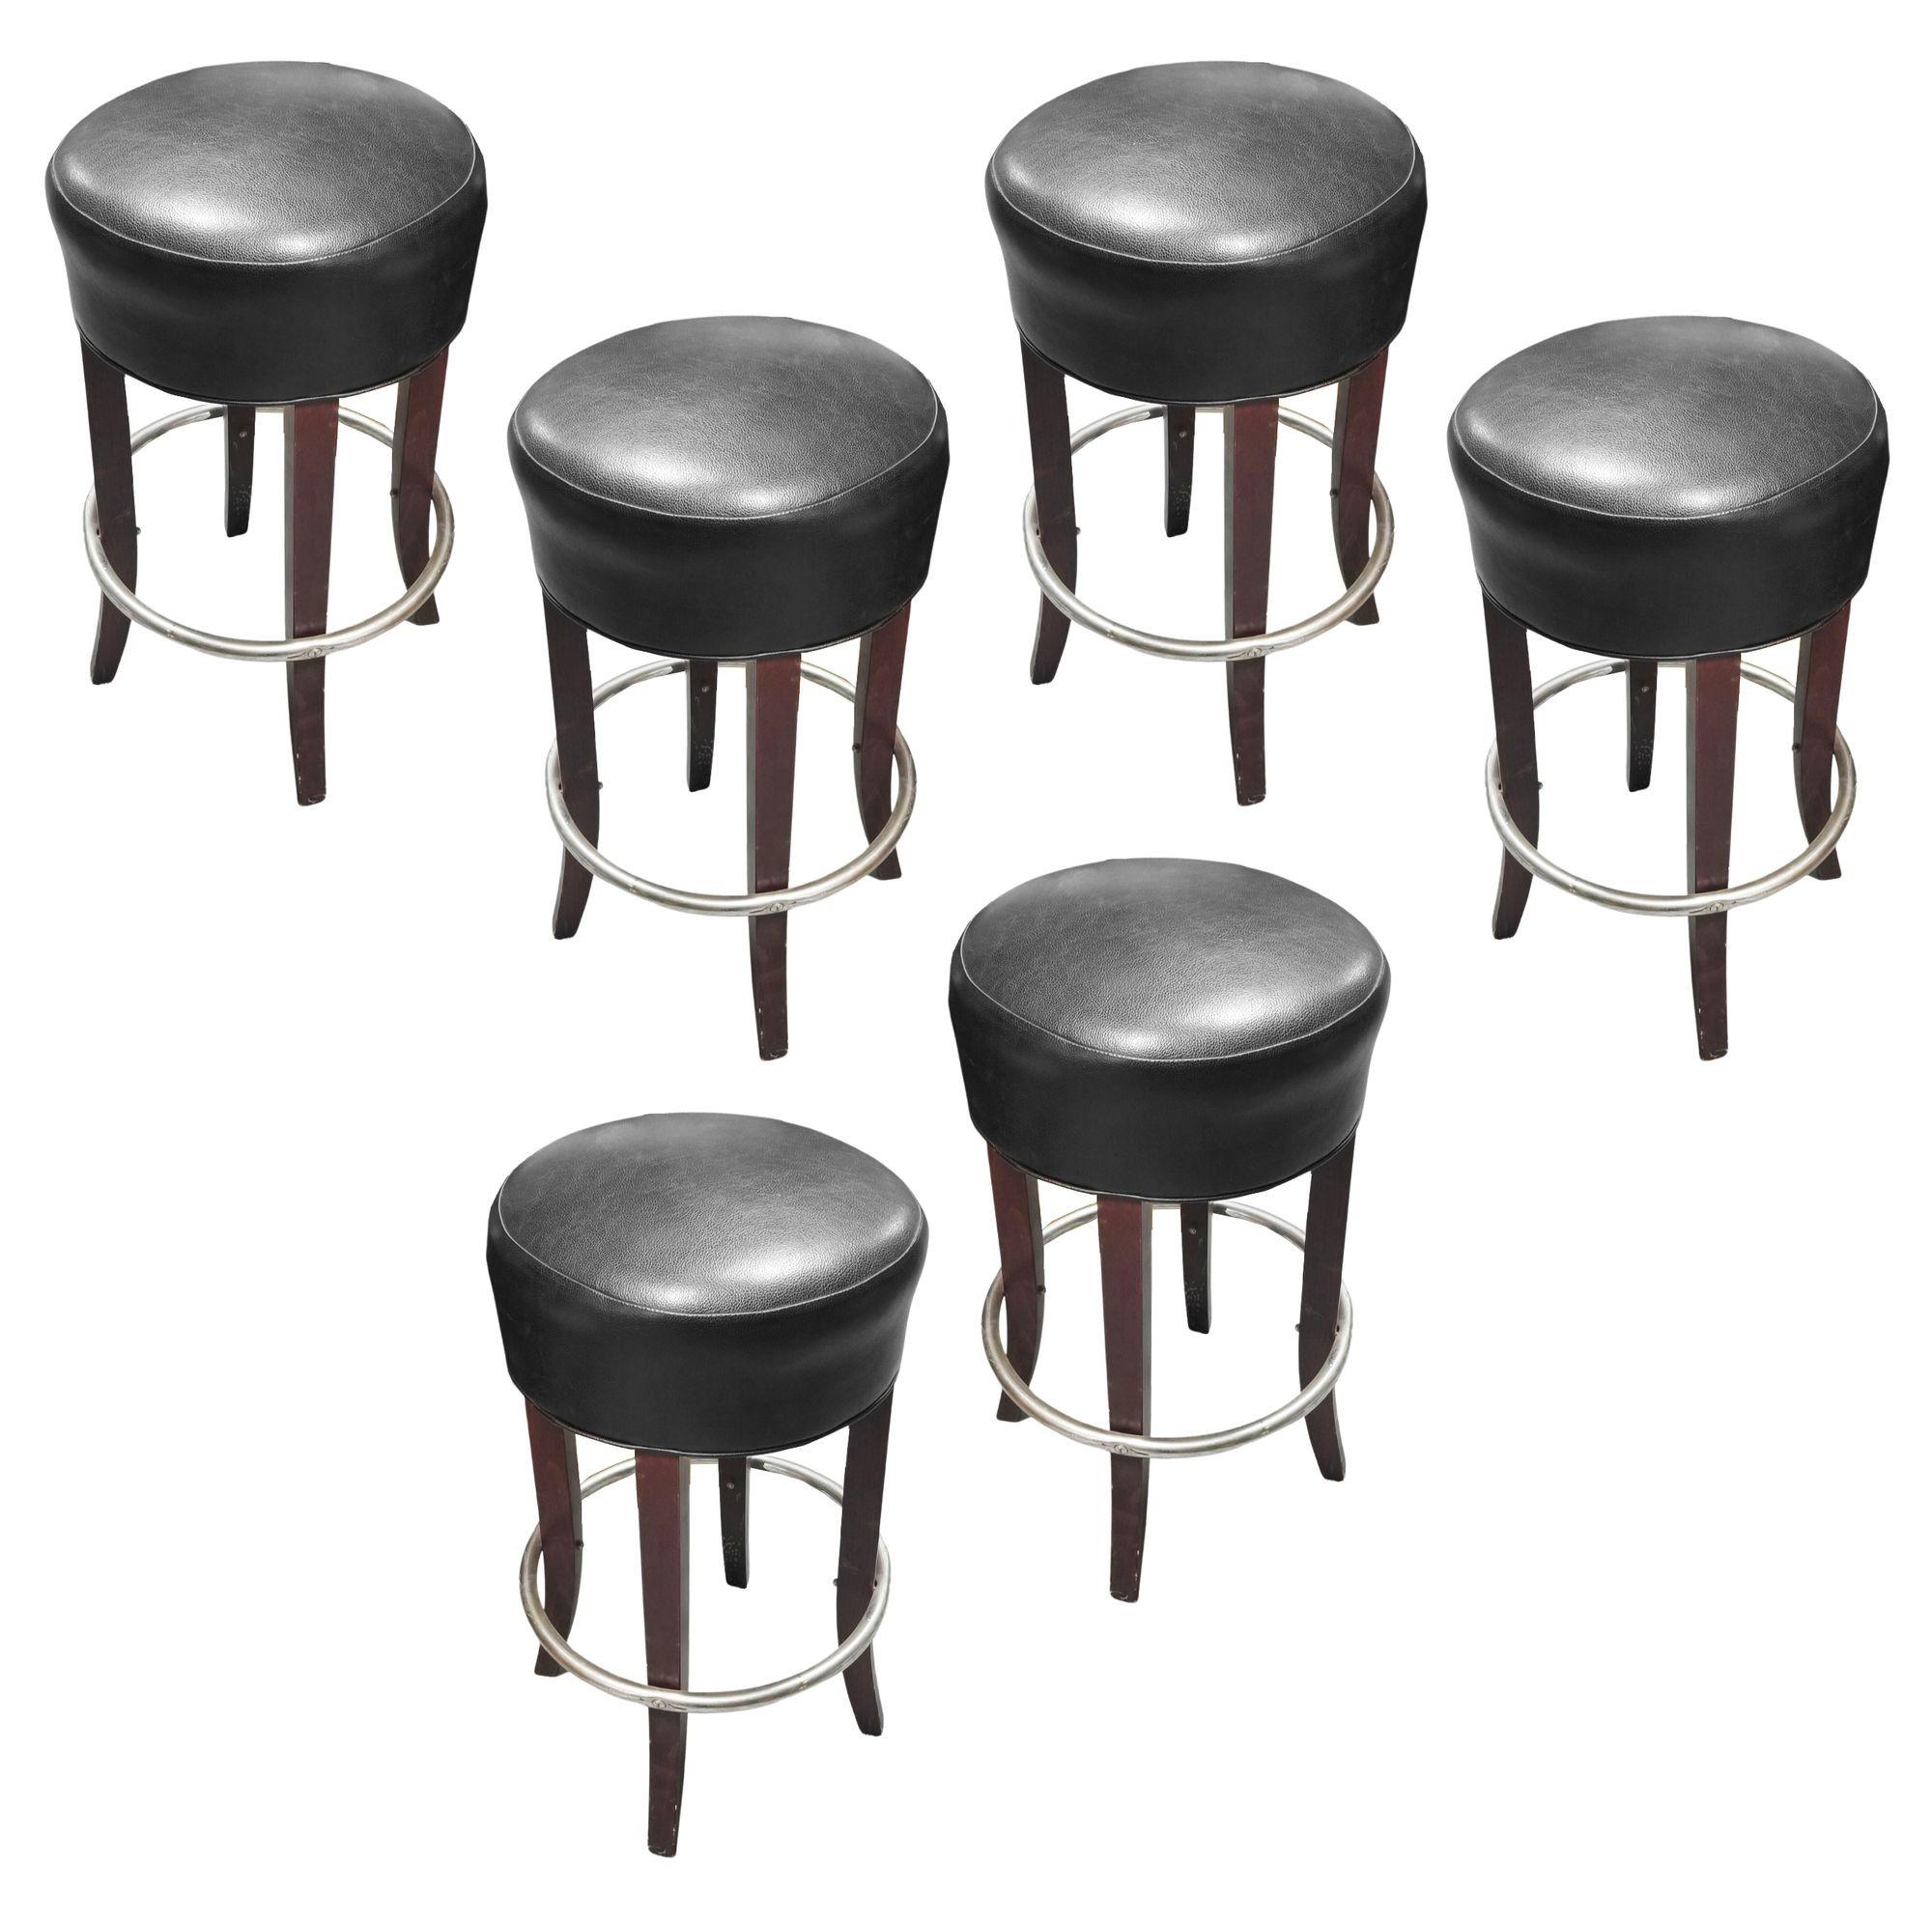 Set of 17 black backless round upholstered bar stools with an upholstered padded box seat and silver round footrest.

A sleek set of 17 black leather bar stools, the epitome of modern elegance. With a minimalist design, these stools offer both